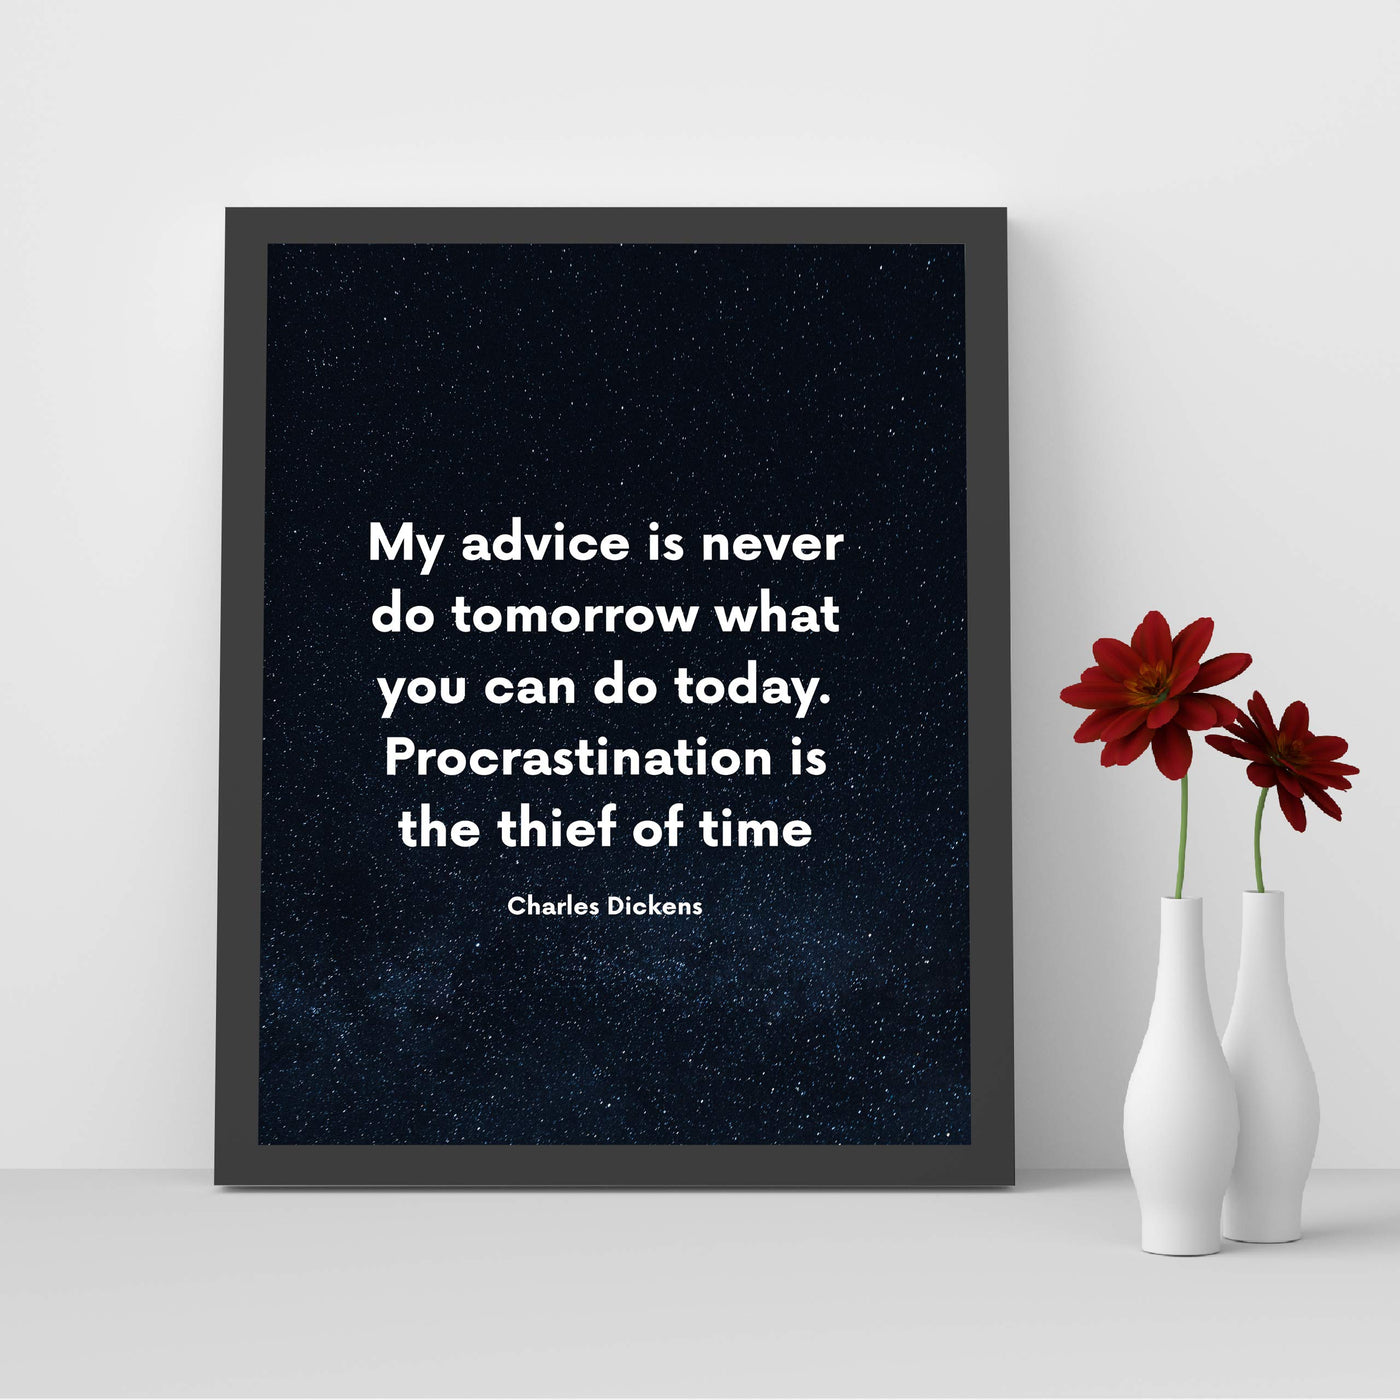 Charles Dickens-"Procrastination Is the Thief of Time"-Motivational Quotes Wall Print-8 x 10" Inspirational Starry Night Print-Ready to Frame. Classic Decor for Home-Office-Studio-Classroom-Dorm!